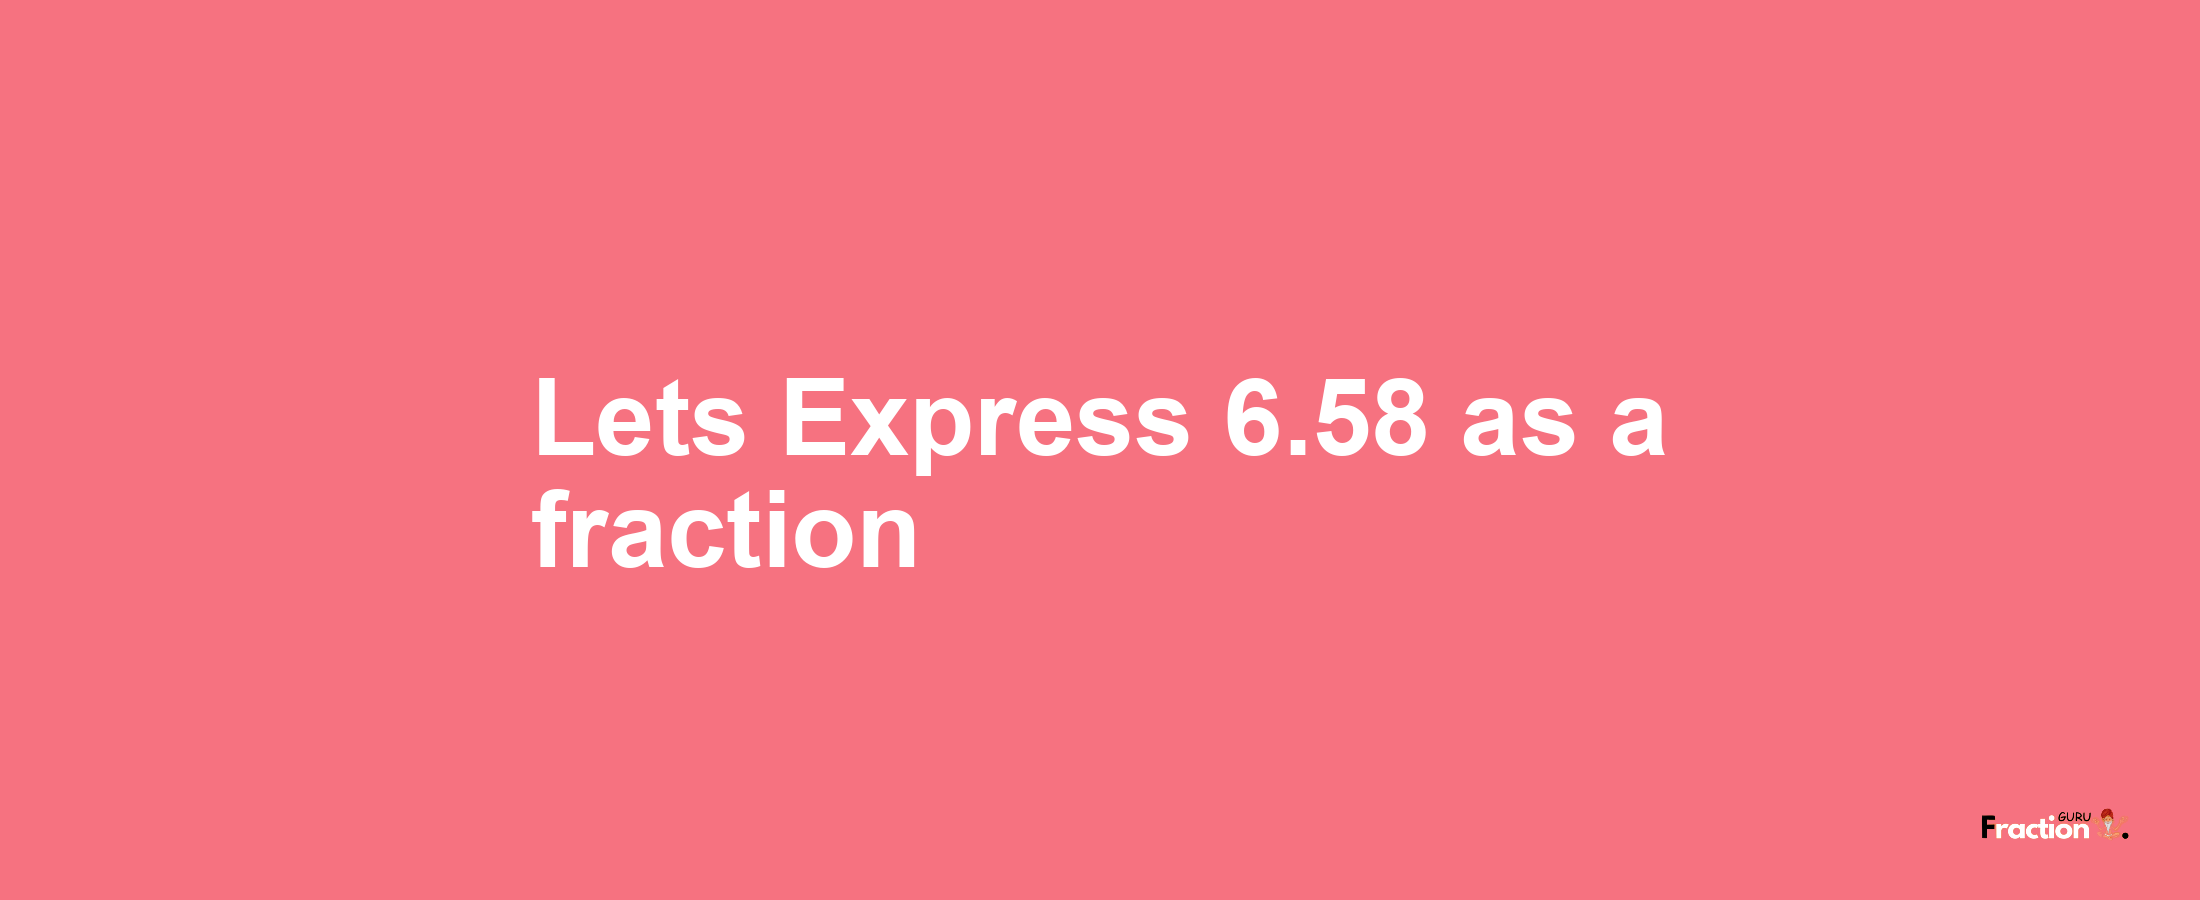 Lets Express 6.58 as afraction